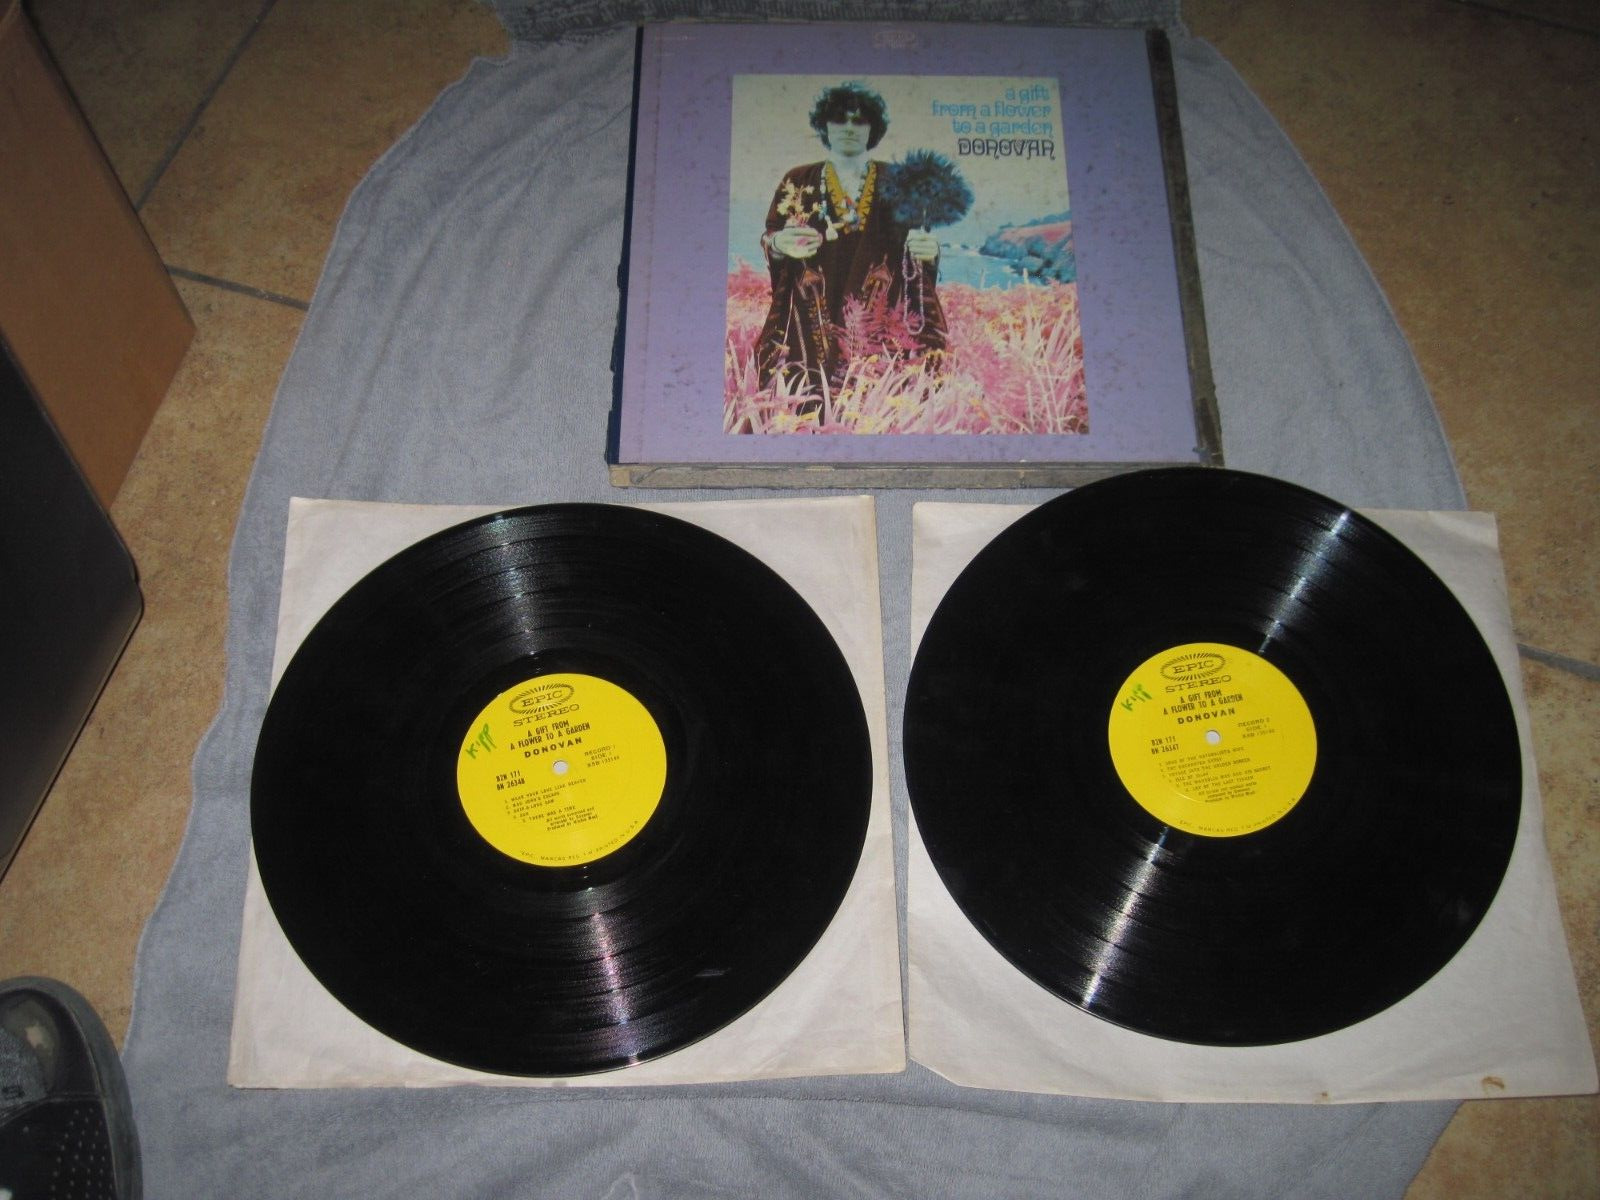 Donovan - A Gift From A Flower To A Garden, X2 Vinyl LP, 1967 VG TeSTED play cop